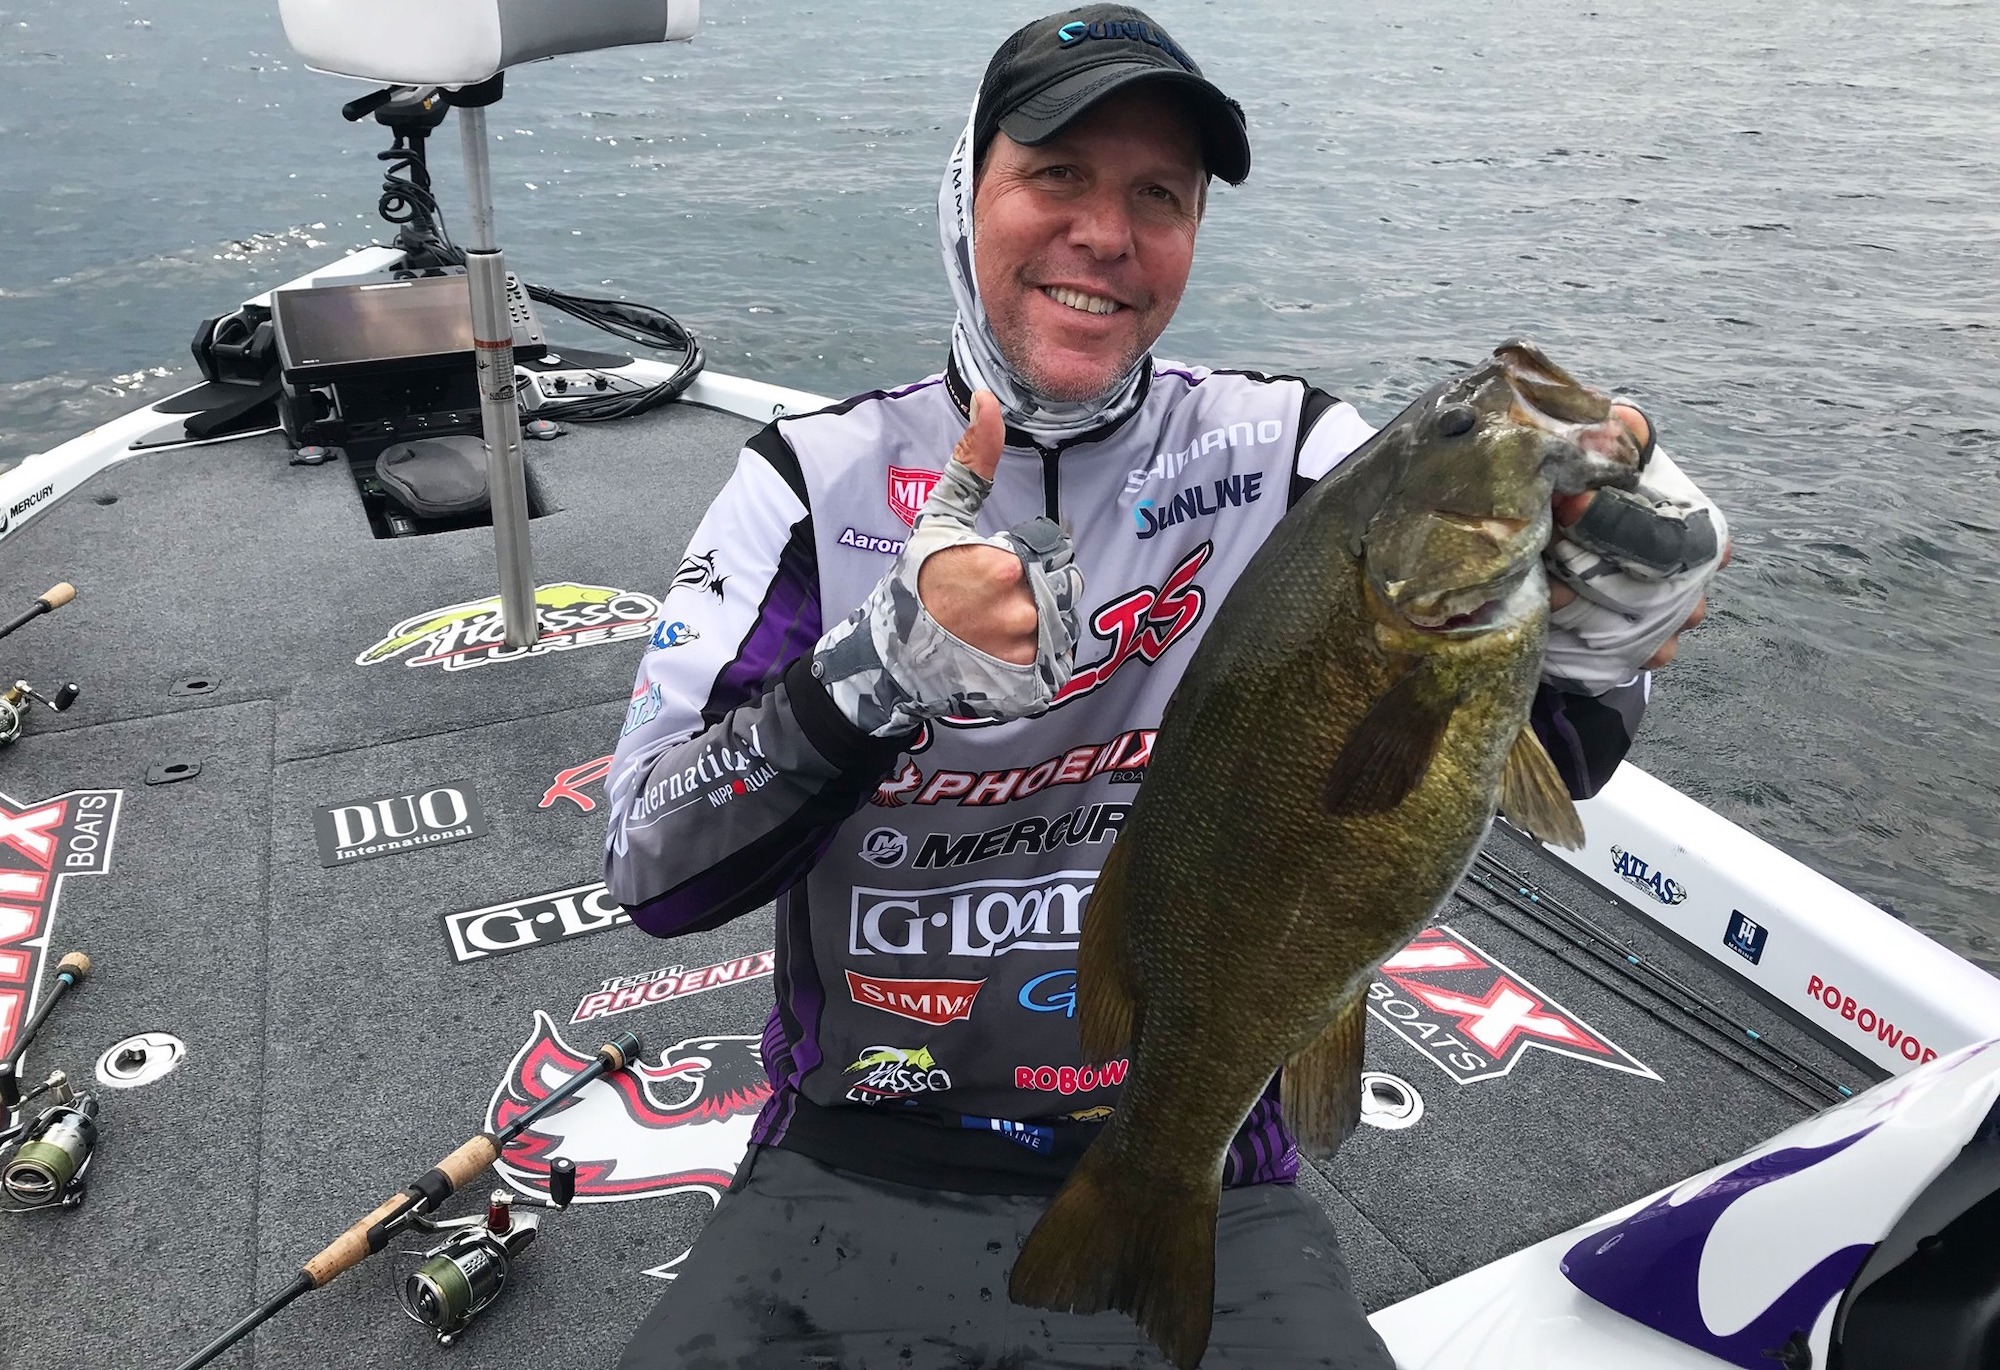 Event 2 of the Bassmaster opens here - Cliff Pace Fishing